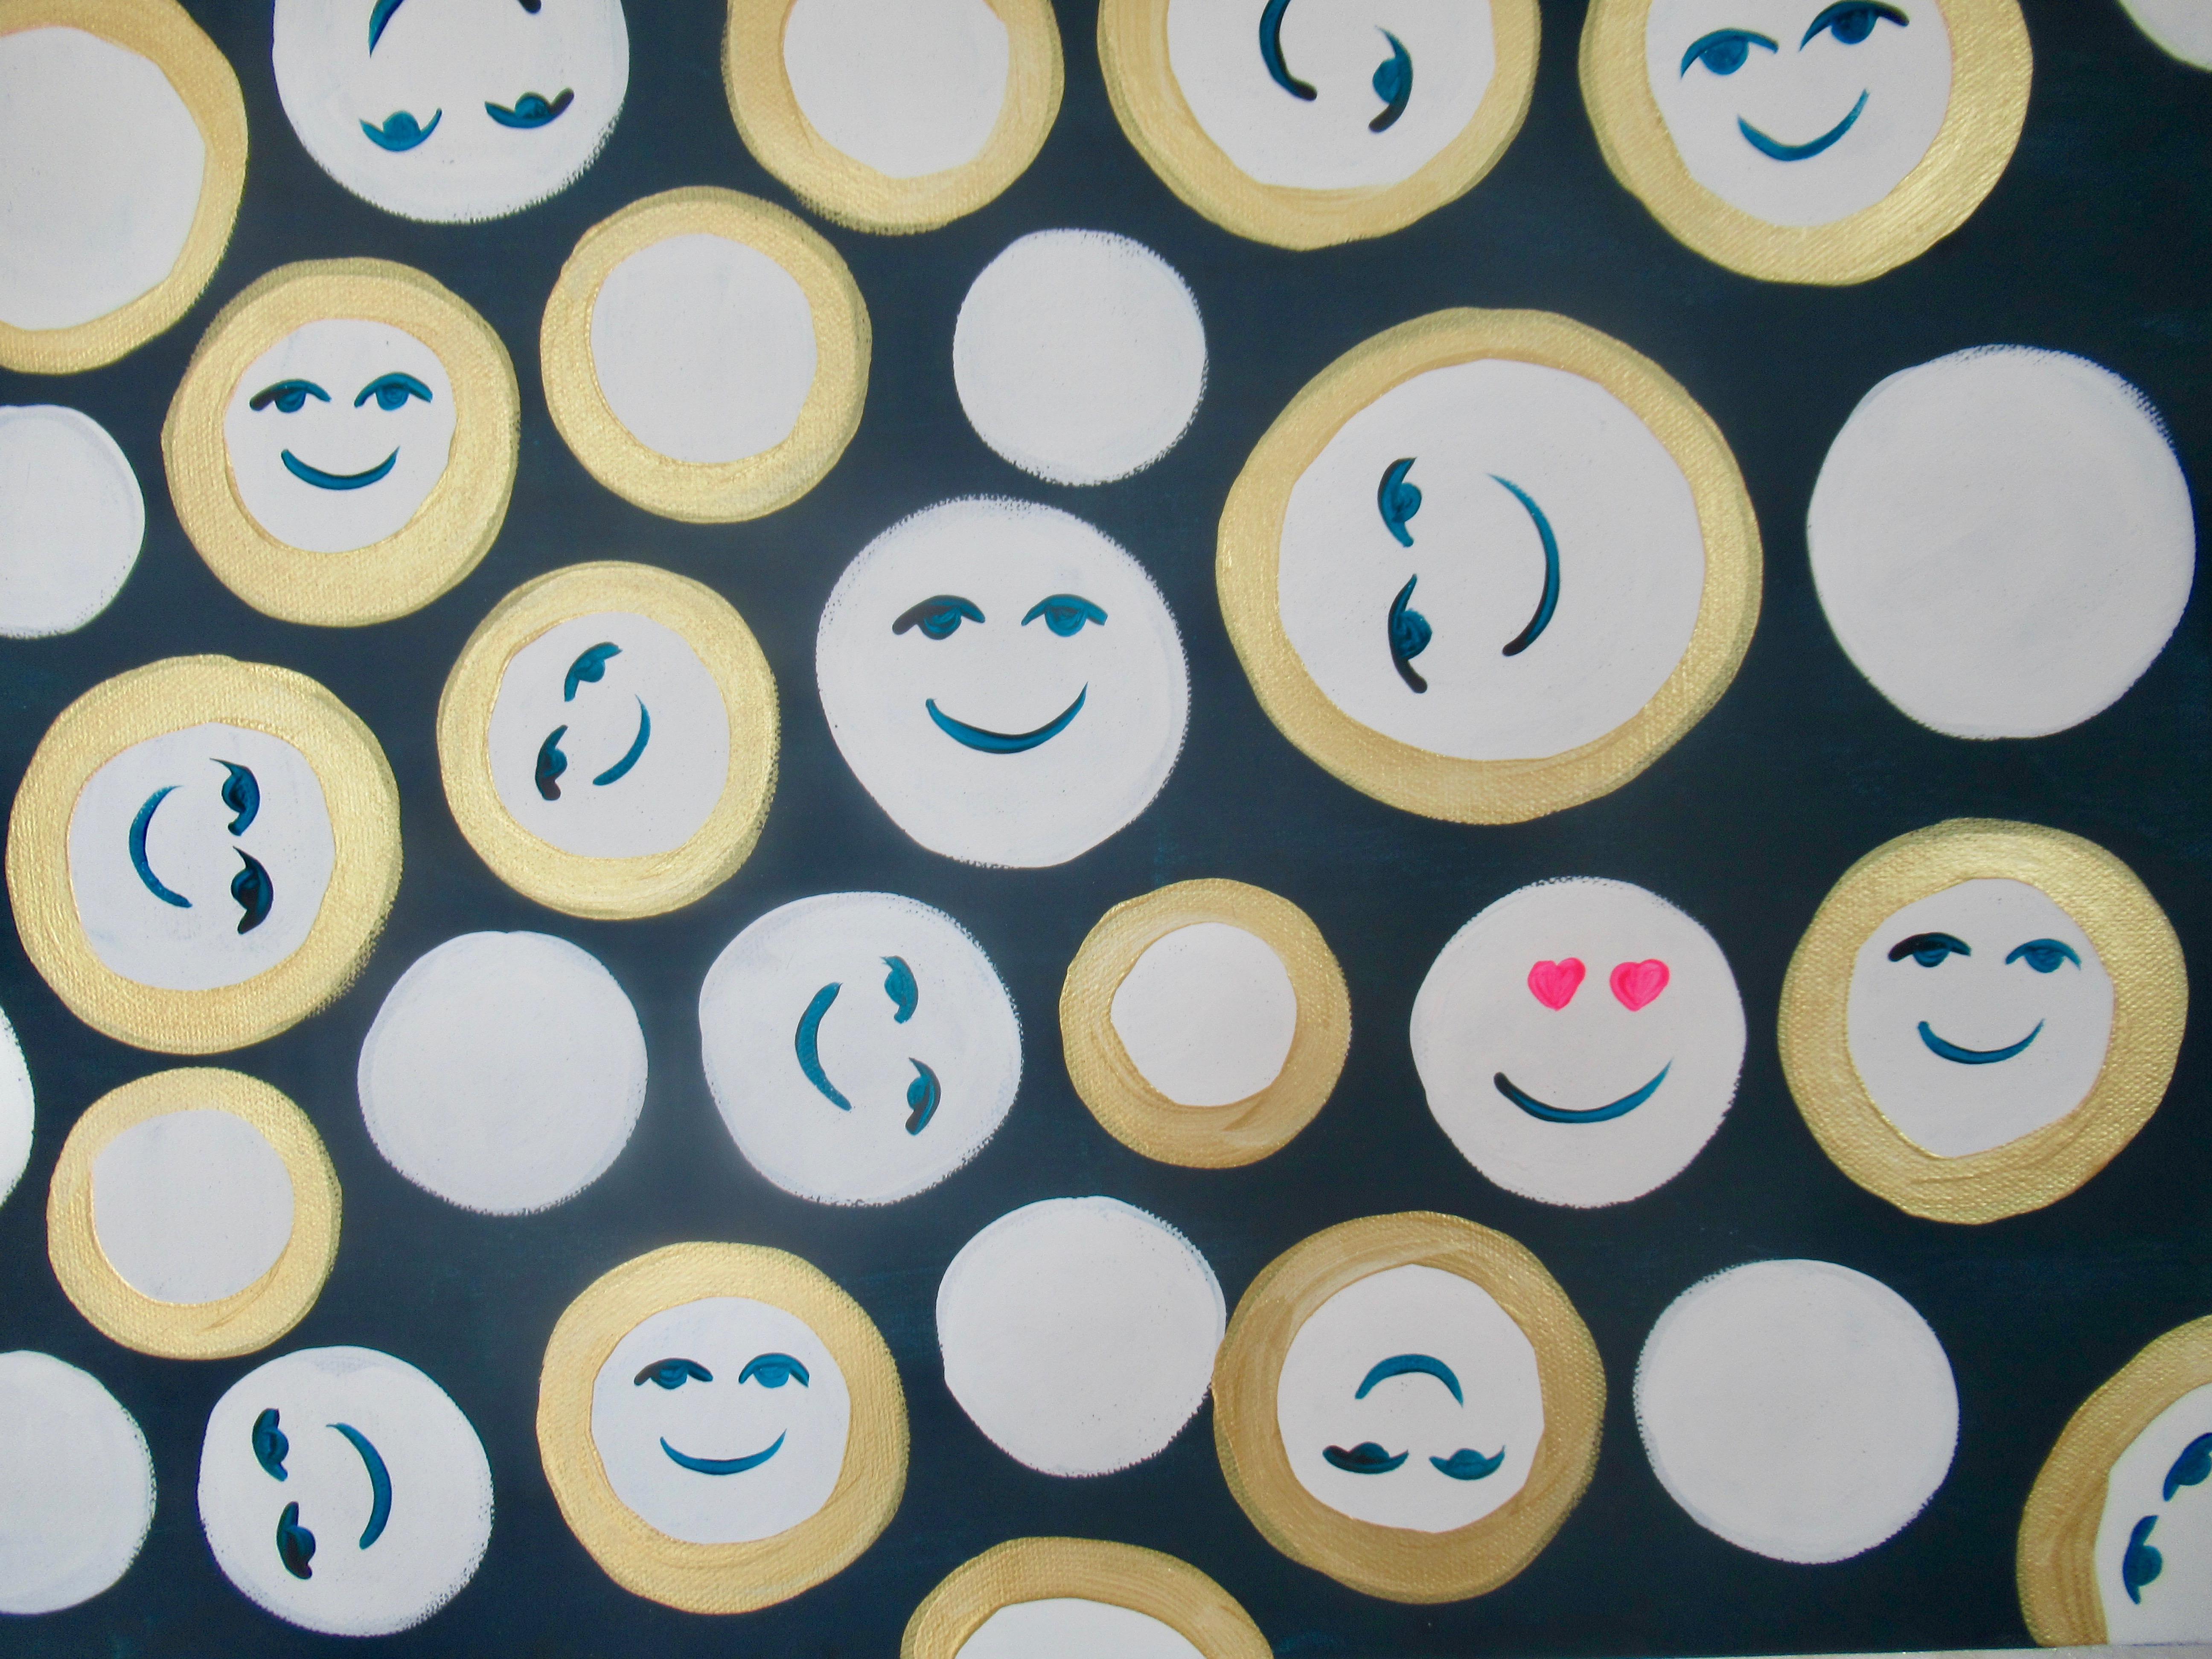 <p>Artist Comments<br />Cheery smiles in white and gold saturate the space against a black background. One face has hearts as eyes, love among all the happy gestures. Part of a series of smiling faces by artist Natasha Tayles.</p><br /><p>About the